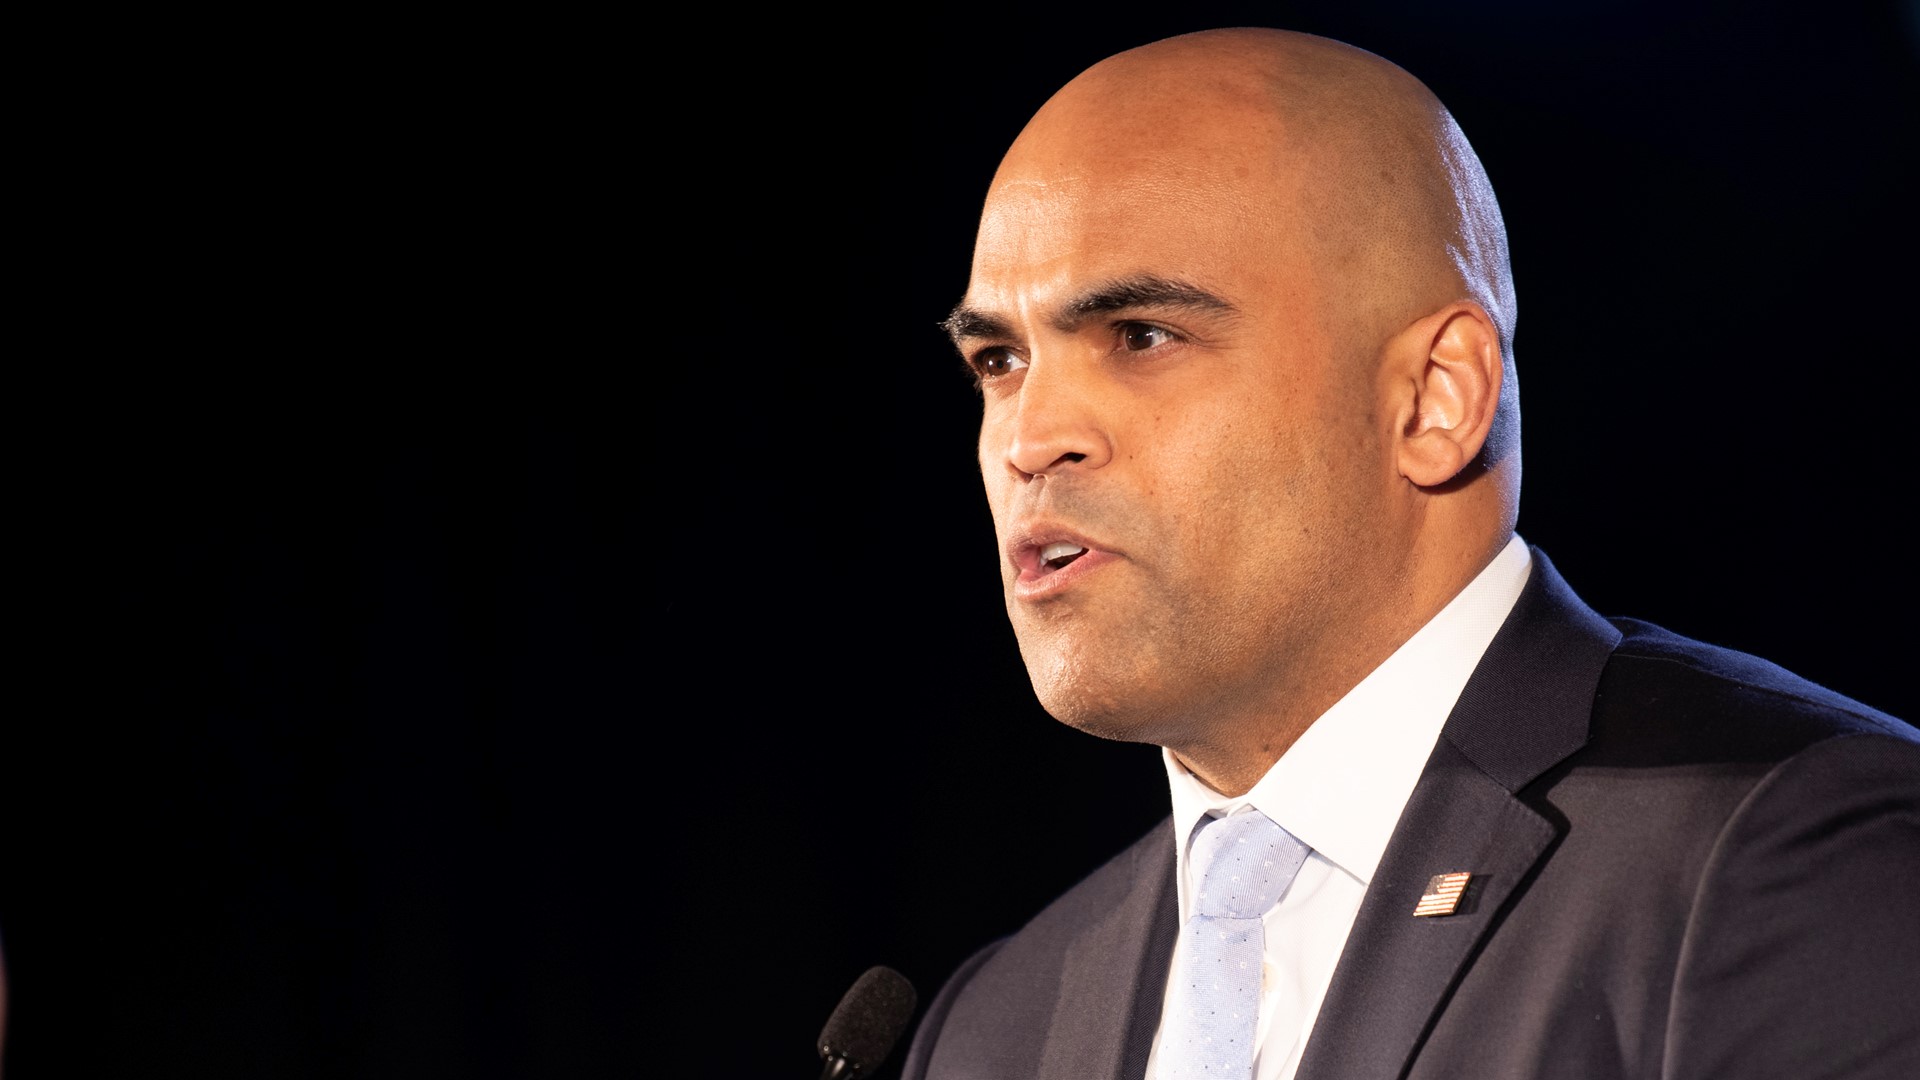 Three-term Congressman Colin Allred has his sights on the U.S. Senate. He's leading the pack in a field of Democrats hoping to take on Sen. Ted Cruz.